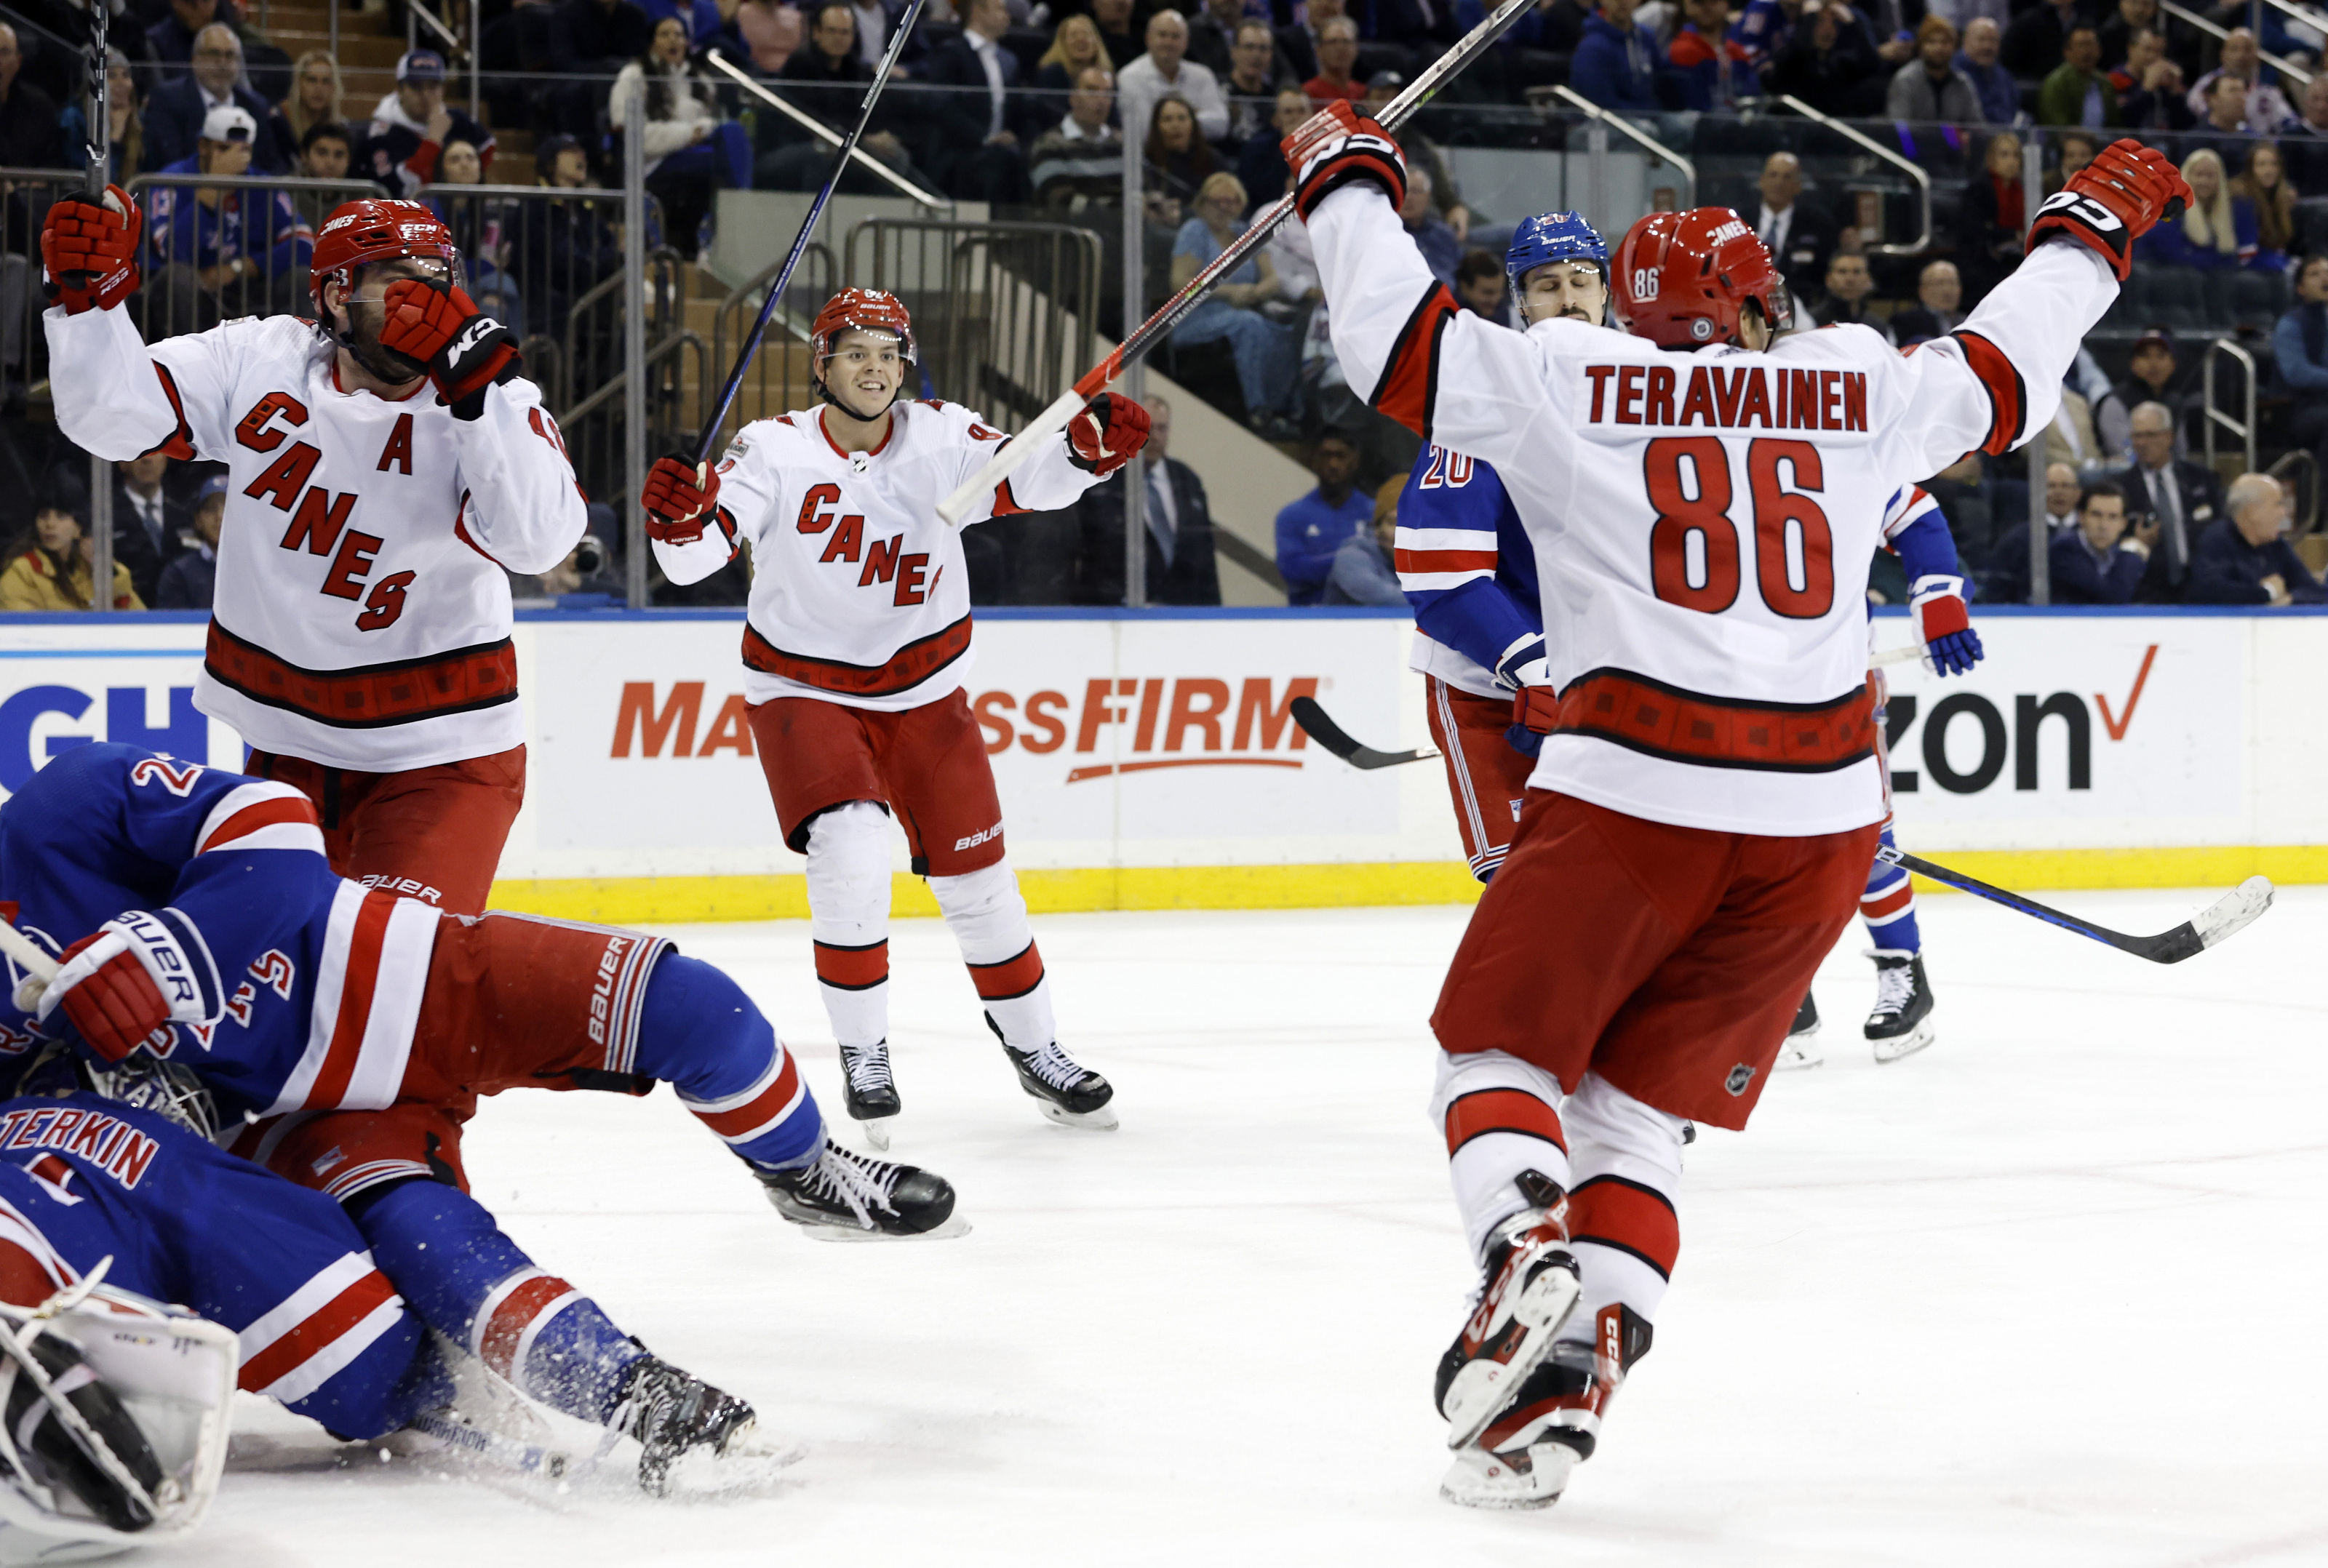 4 Takeaways From New Jersey Devils' 2-1 Win Over the Rangers